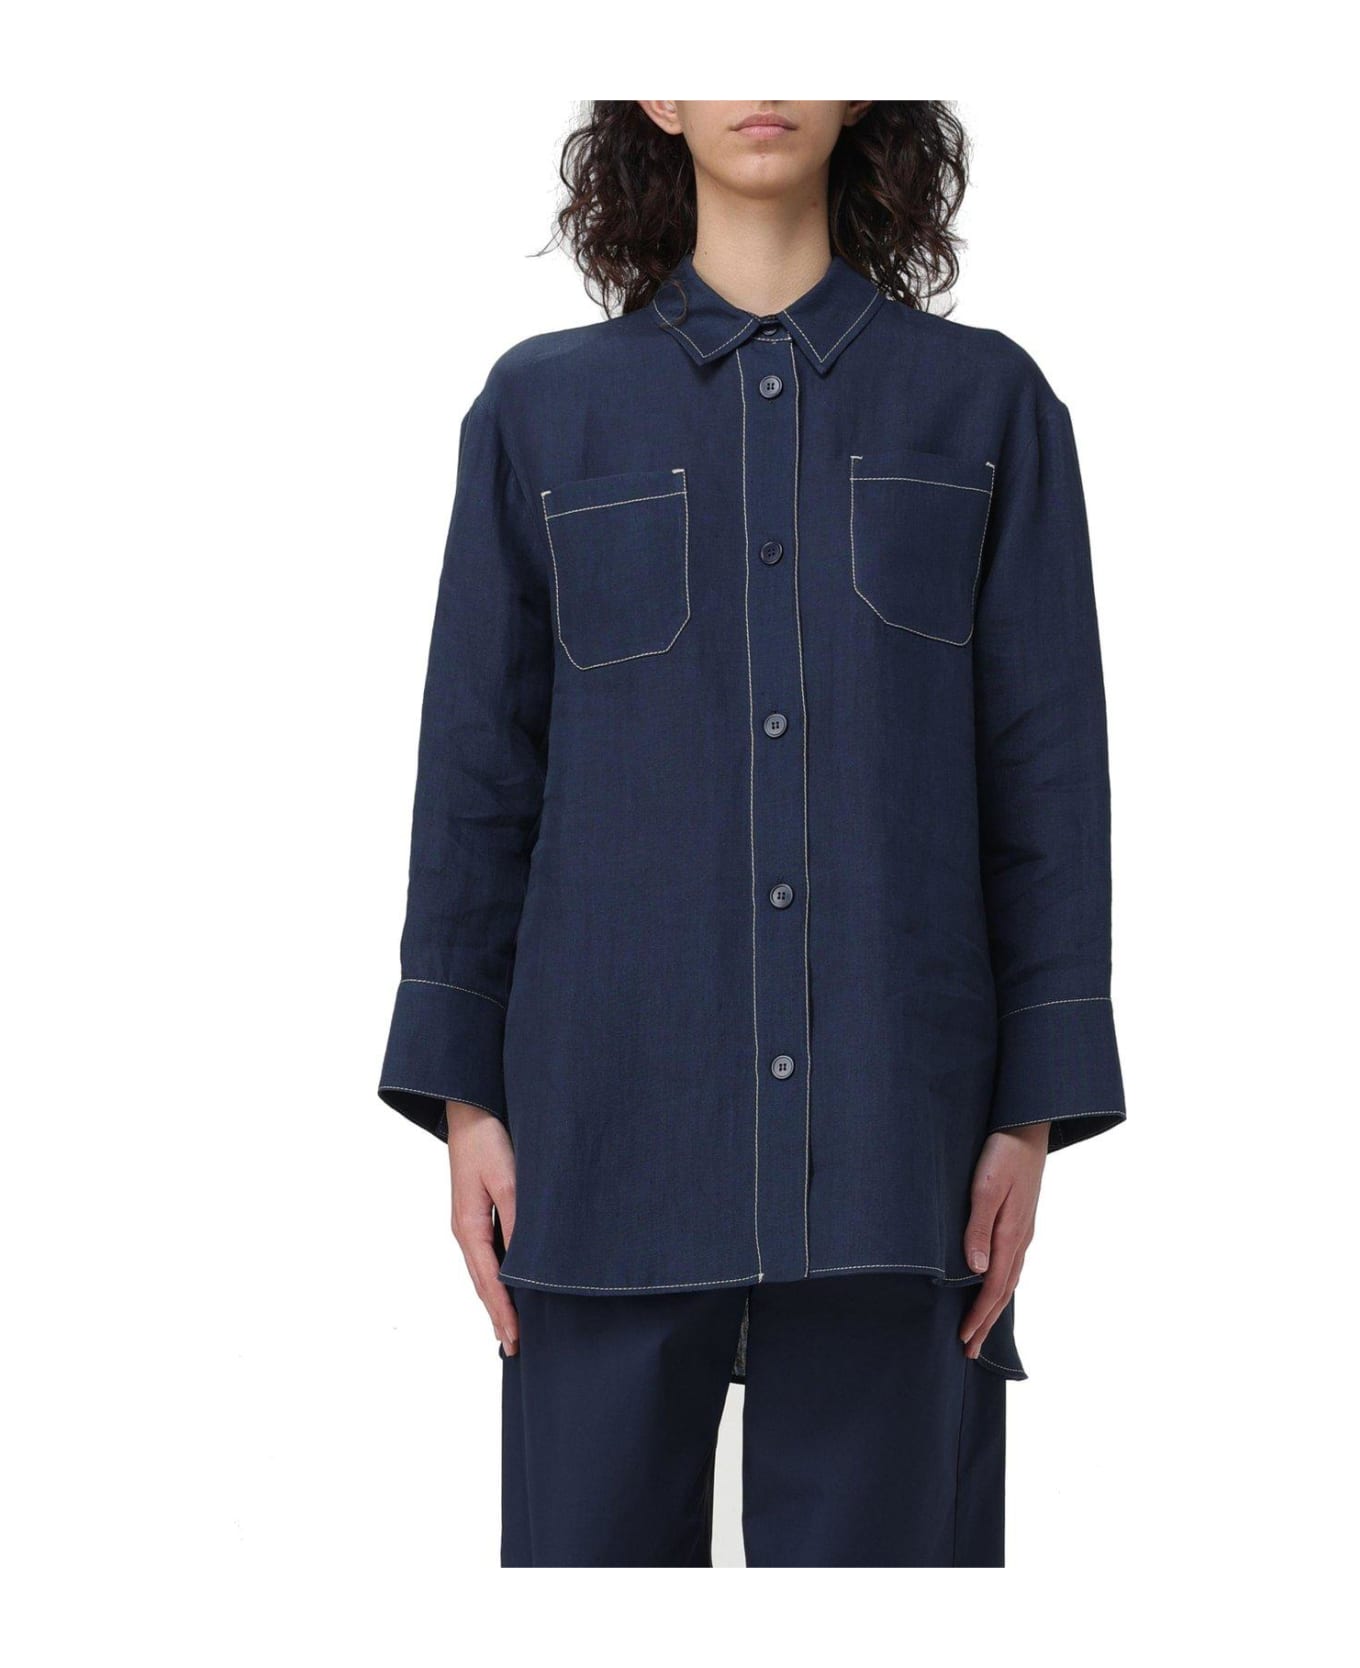 'S Max Mara Buttoned Long-sleeved Top - BLUE トップス